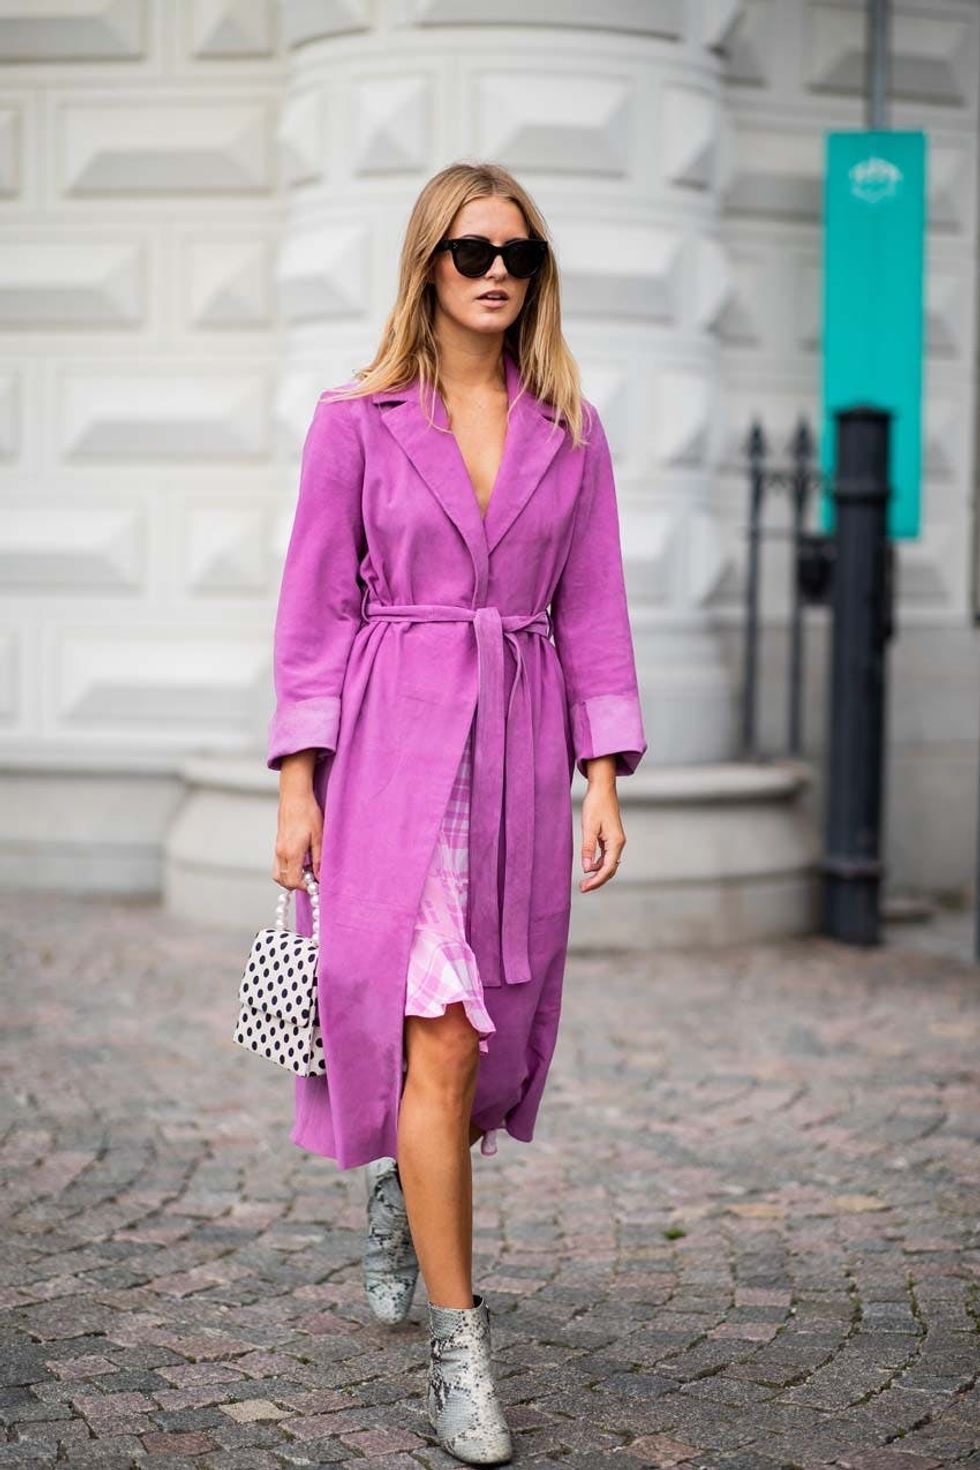 The Top Fashion Trends to Know in 2019 - Brit + Co